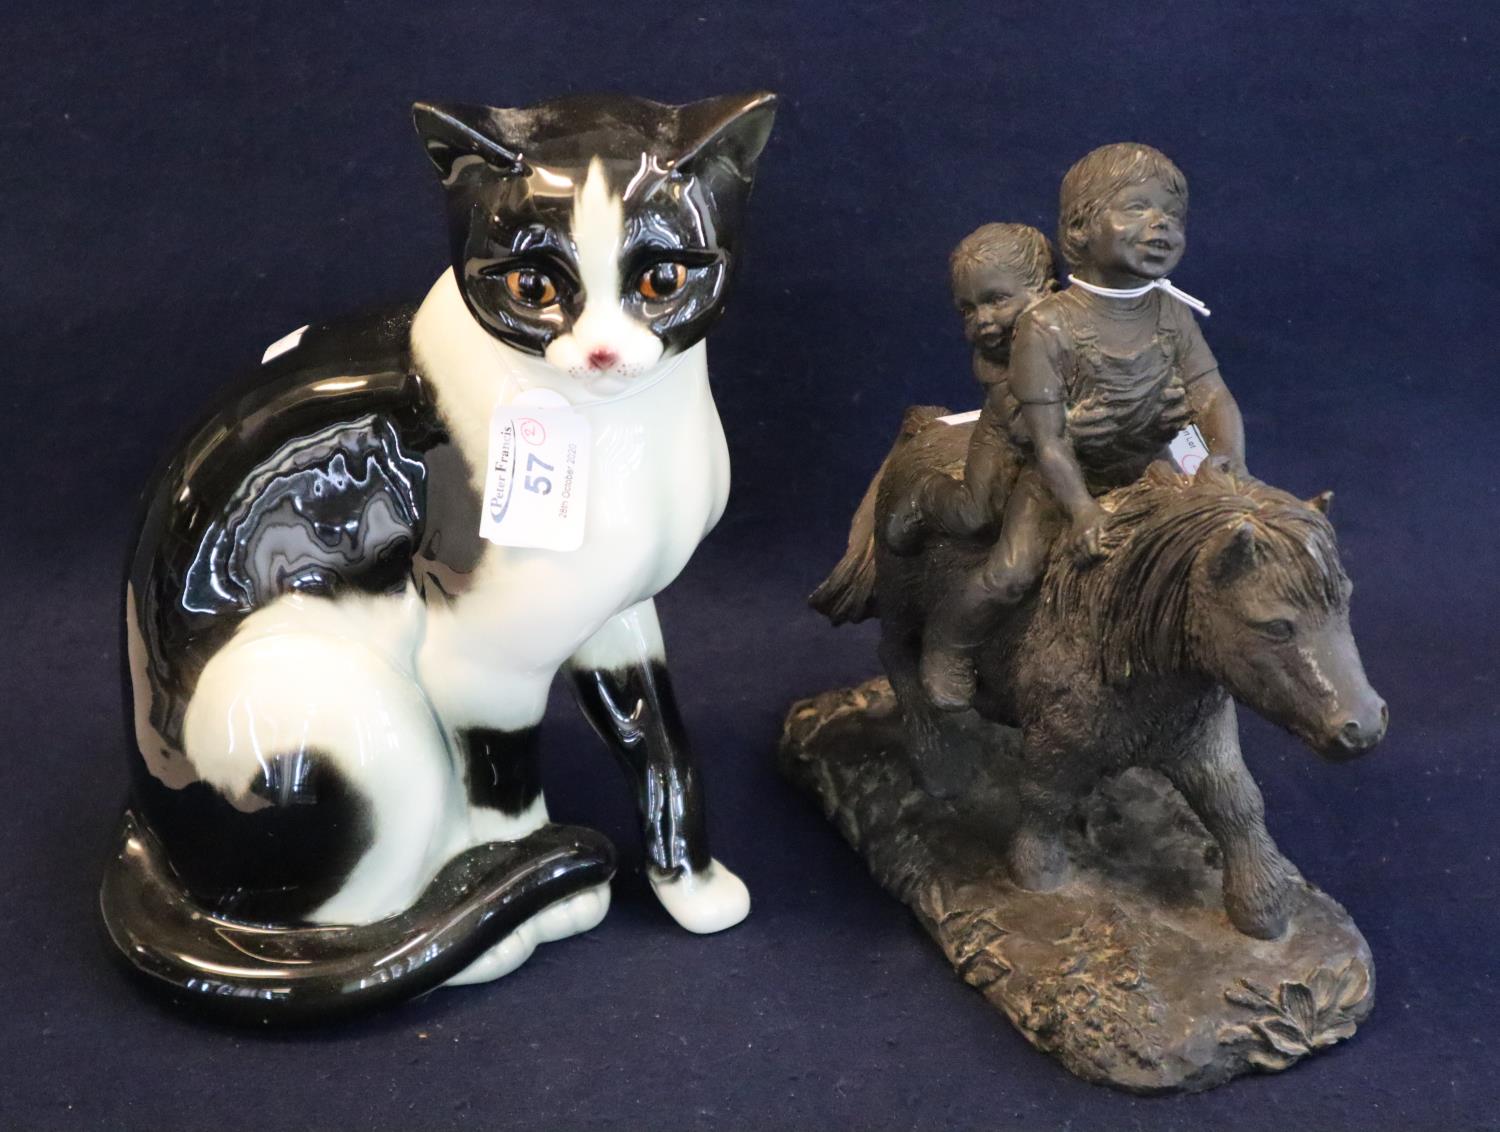 A Goebels German china study of a seated cat, 27cm approx. Together with a bronzed resin Thelwell